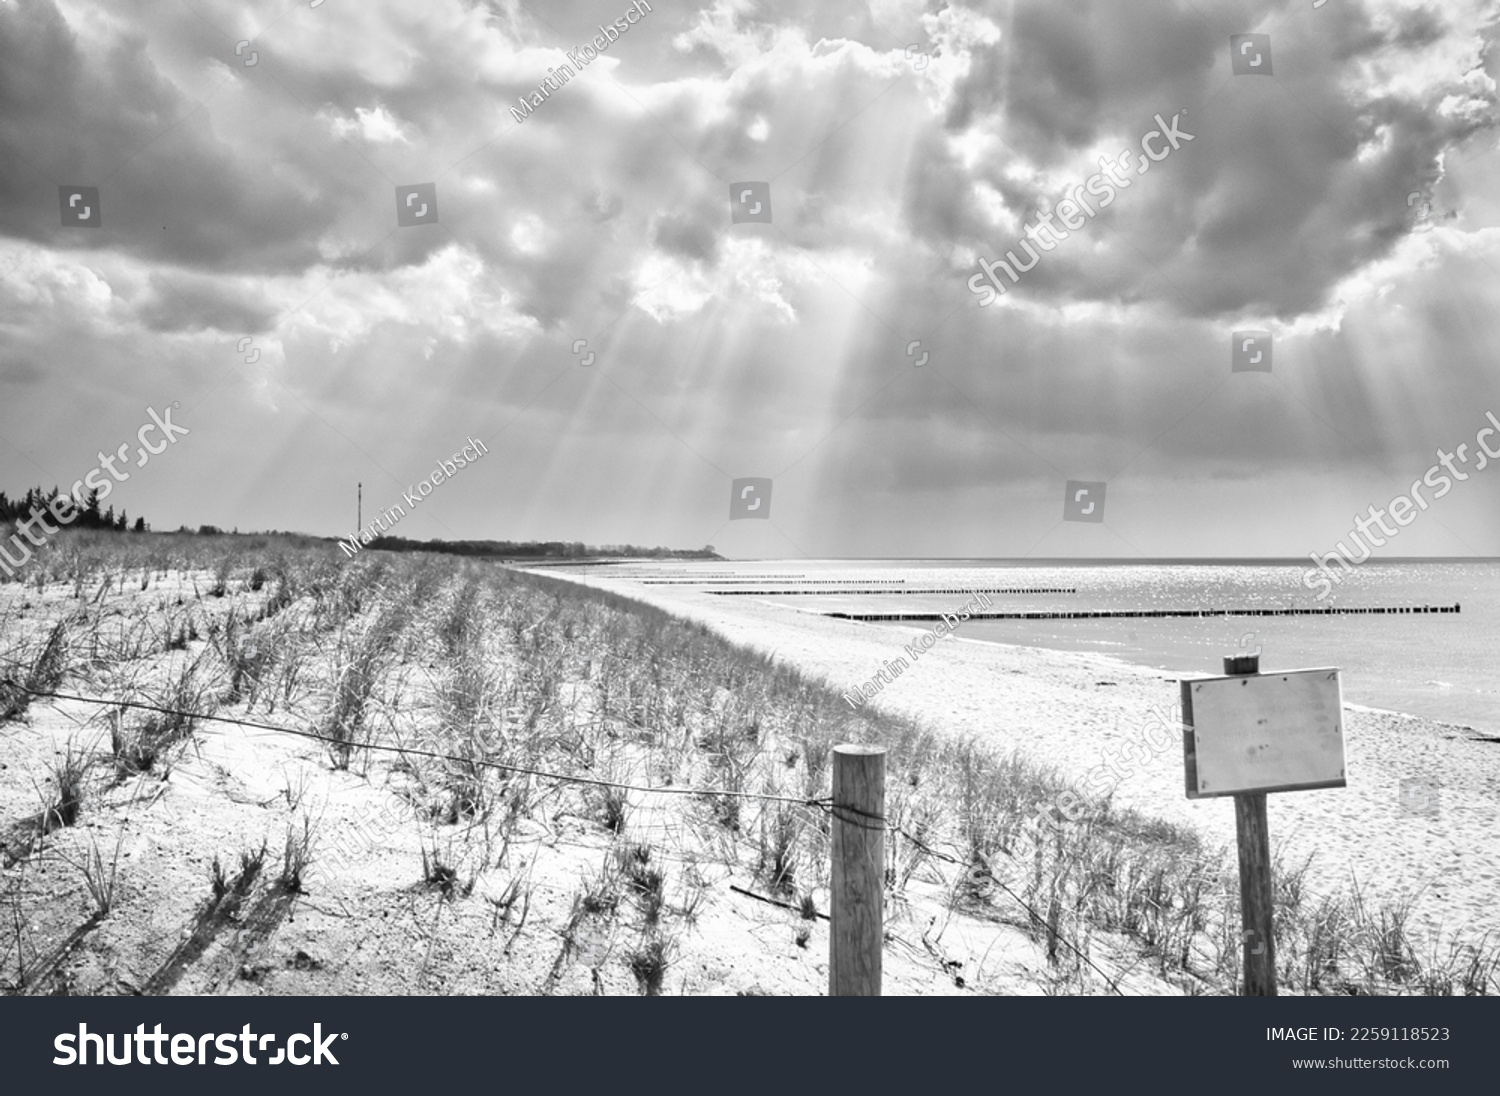 Sun rays shining through dense clouds on the beach of the Baltic Sea taken in black and white. Sign at the beach crossing. Groynes on the coast. Sandy beach in Zingst. Landscape photo from Germany #2259118523